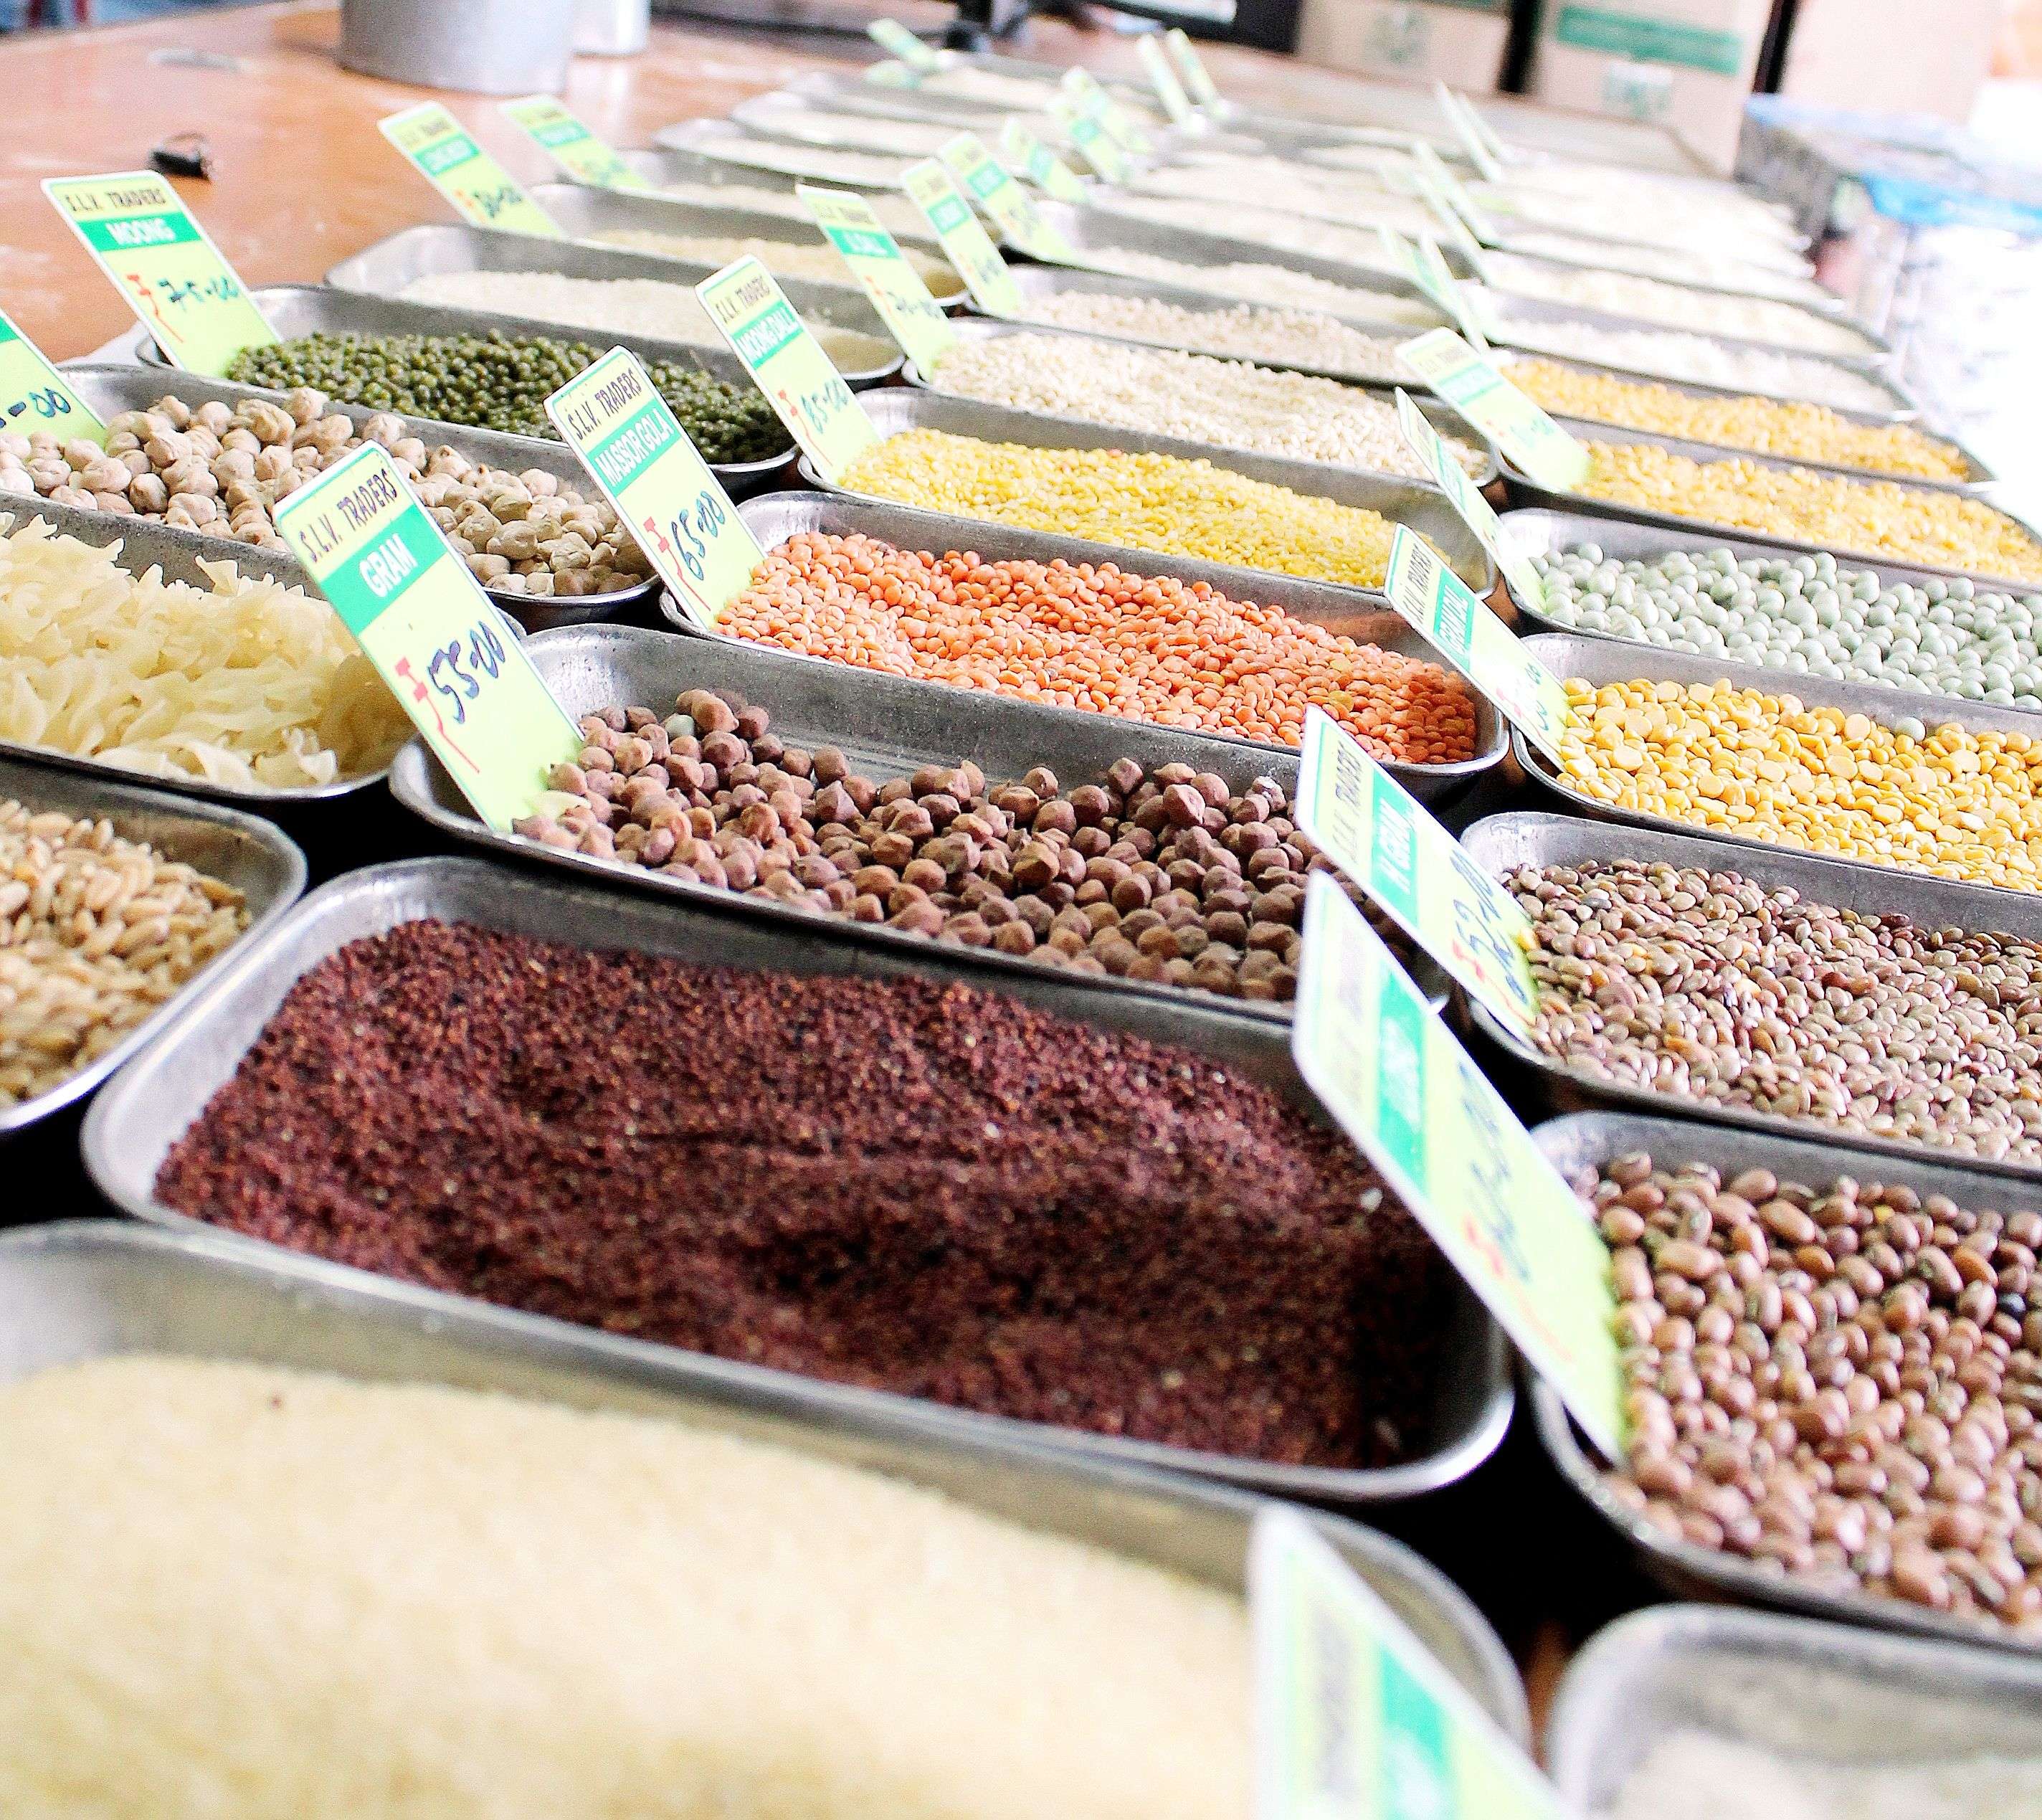 Pulses in a grossery shop in Bangalore on Monday